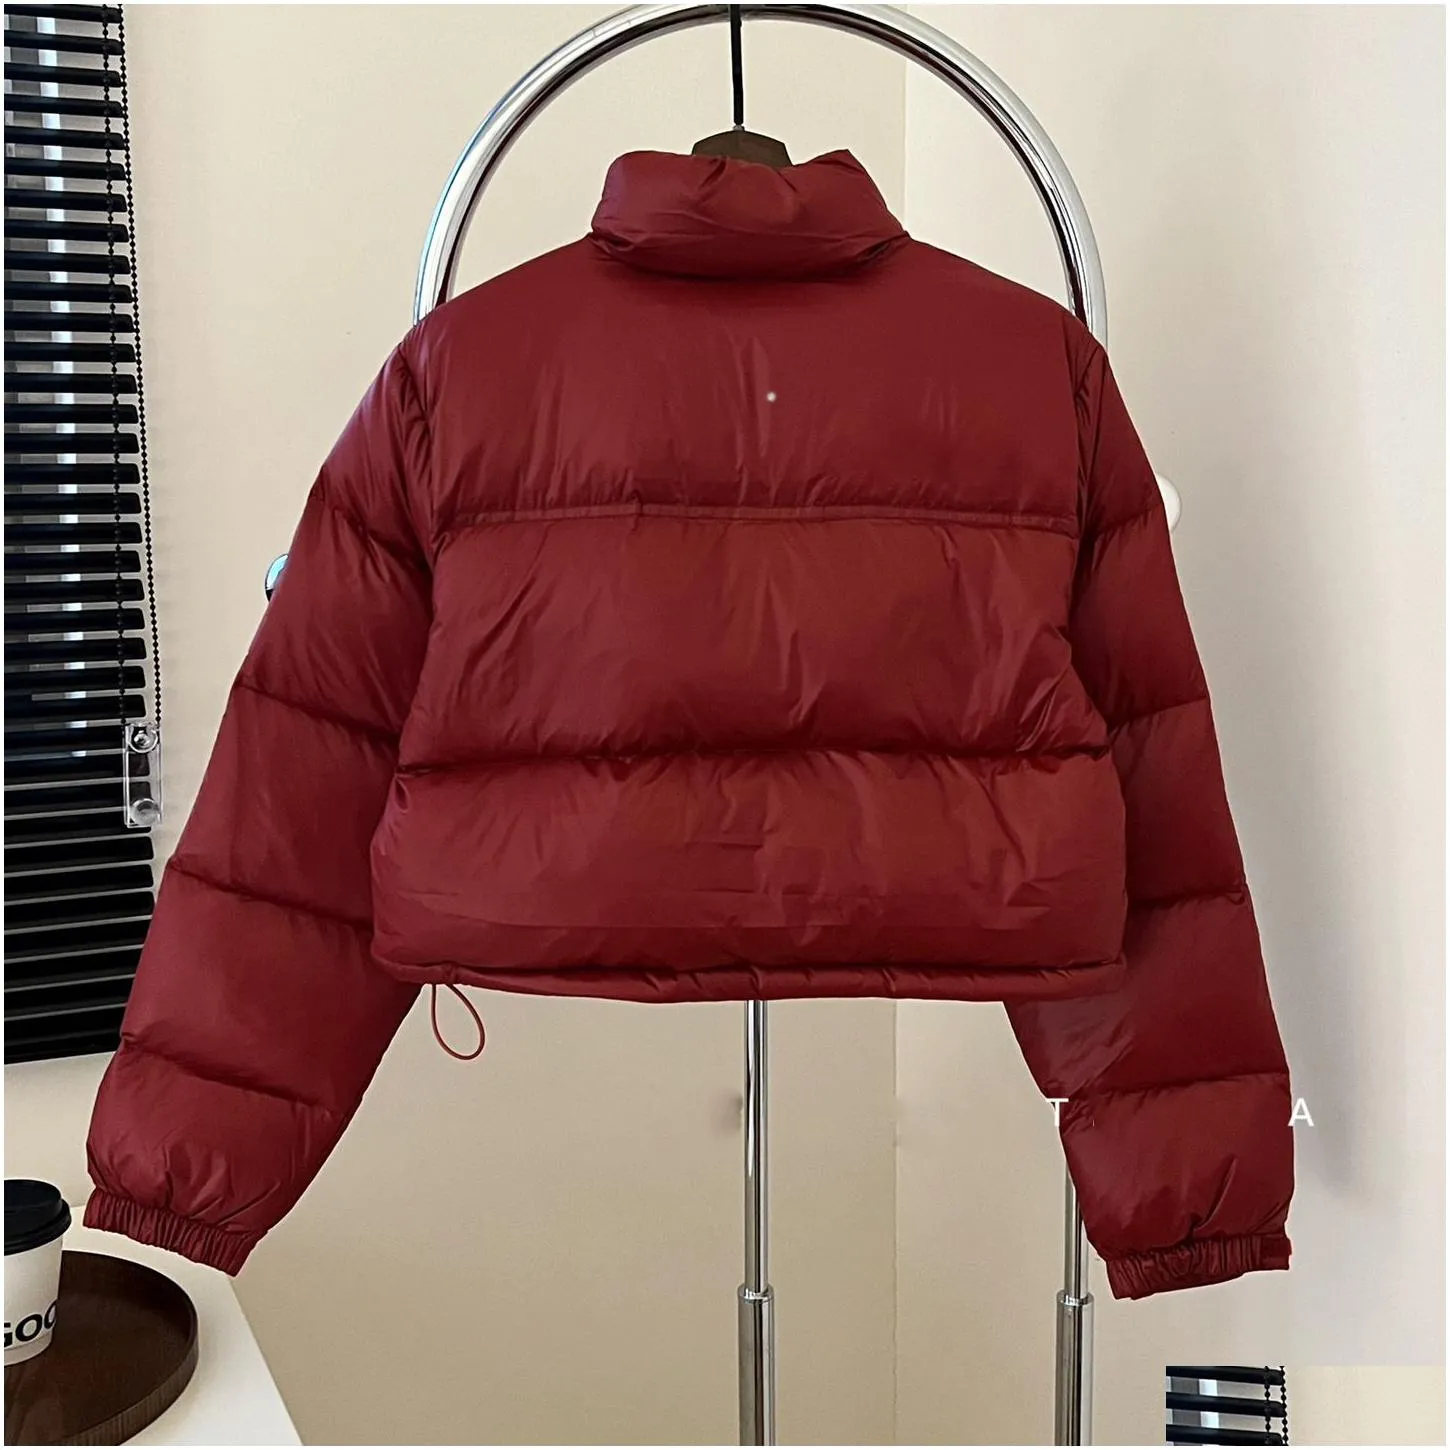 23FW Women Short 700 Down jackets Classic North 1996 Winter Coat Solid Color Woman Clothing Puffer Jacket Size S-L